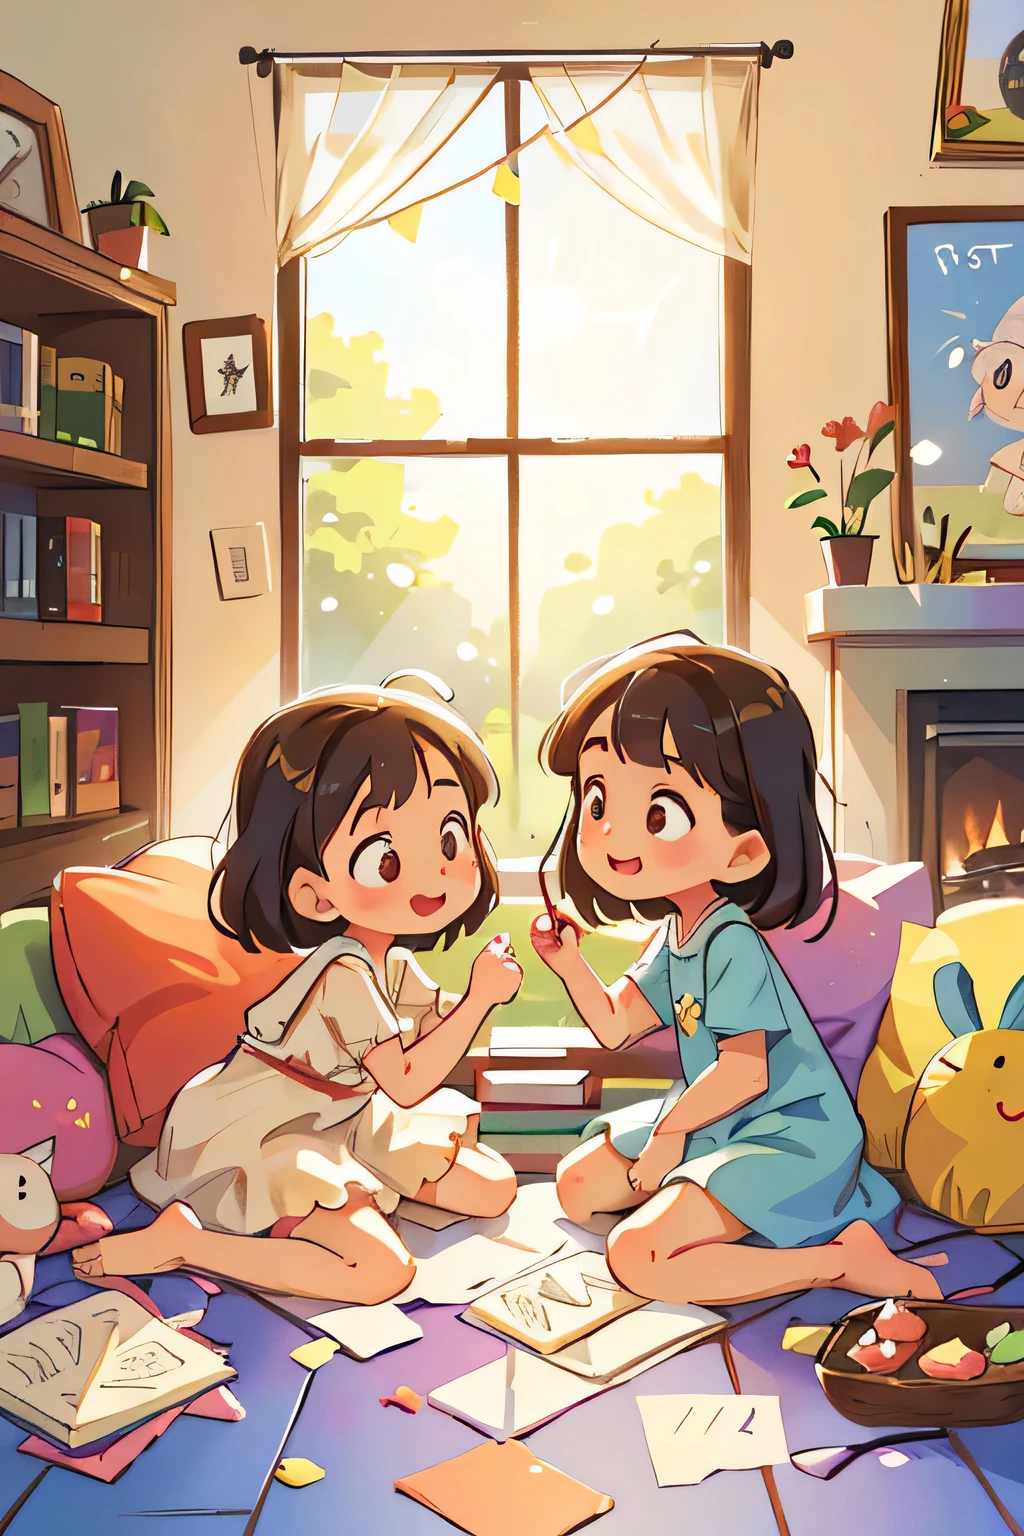 Two sisters, clad in frilly dresses and bare feet, play contentedly with colorful toys scattered across the tiled floor of their cozy home. The sun filters in through the open window, casting a warm glow over the scene. In the background, a welcoming living room comes into view, filled with familiar pieces: a plush sofa, a bookshelf lined with children's books, and a family photo displayed proudly on the mantel. Together, their laughter fills the room, capturing the simple joys of childhood. (Full body view, HD, best quality)